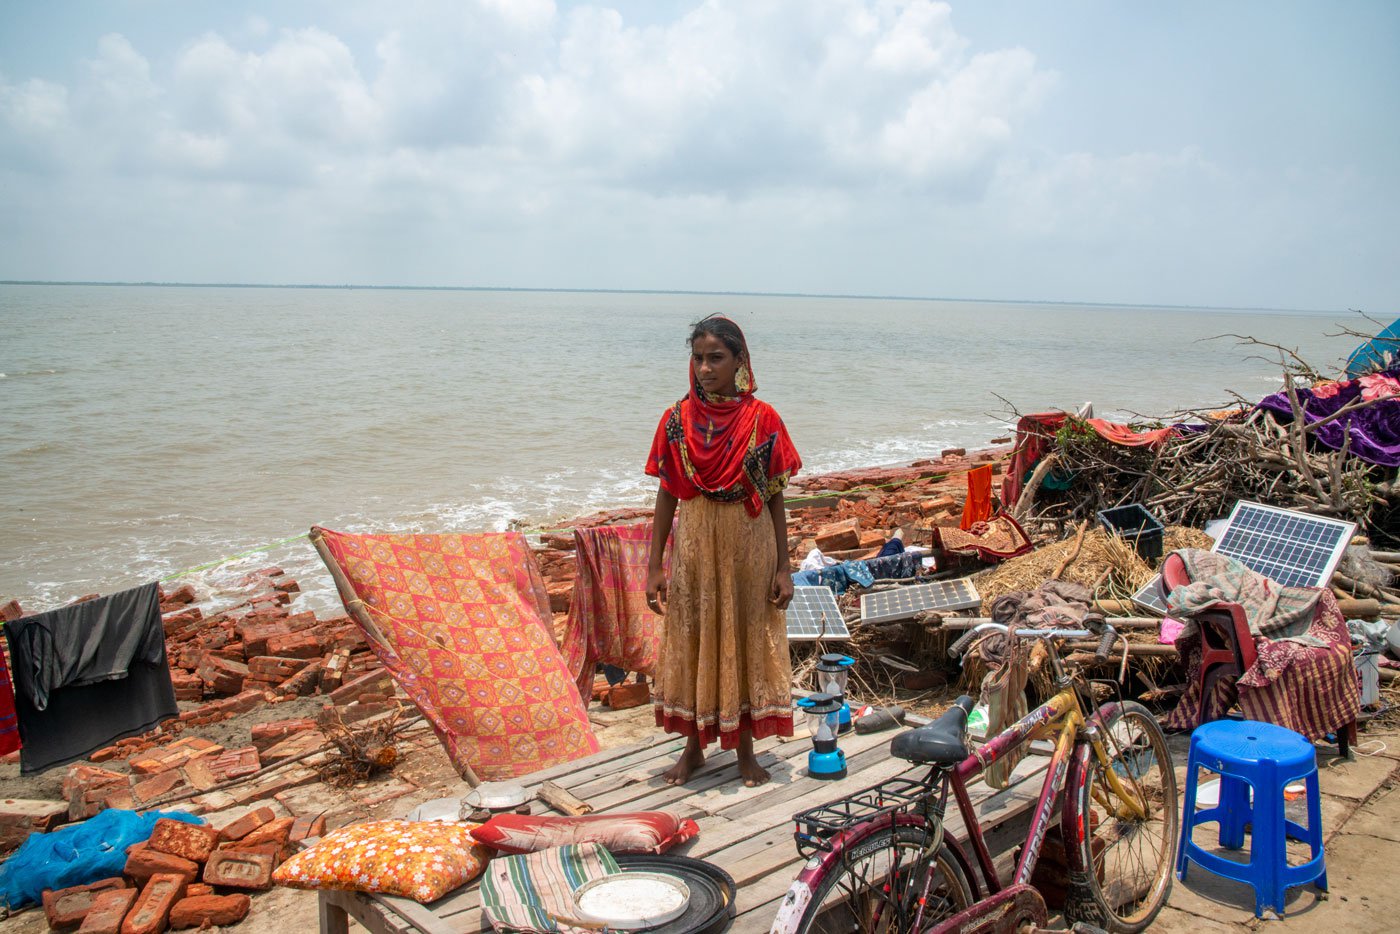 Cyclone Yaas brought Mousuni's lands underwater on May 26, a year after Amphan had hit the Sundarbans. PARI visited the island and found people saving what they could of their damaged homes and livelihoods